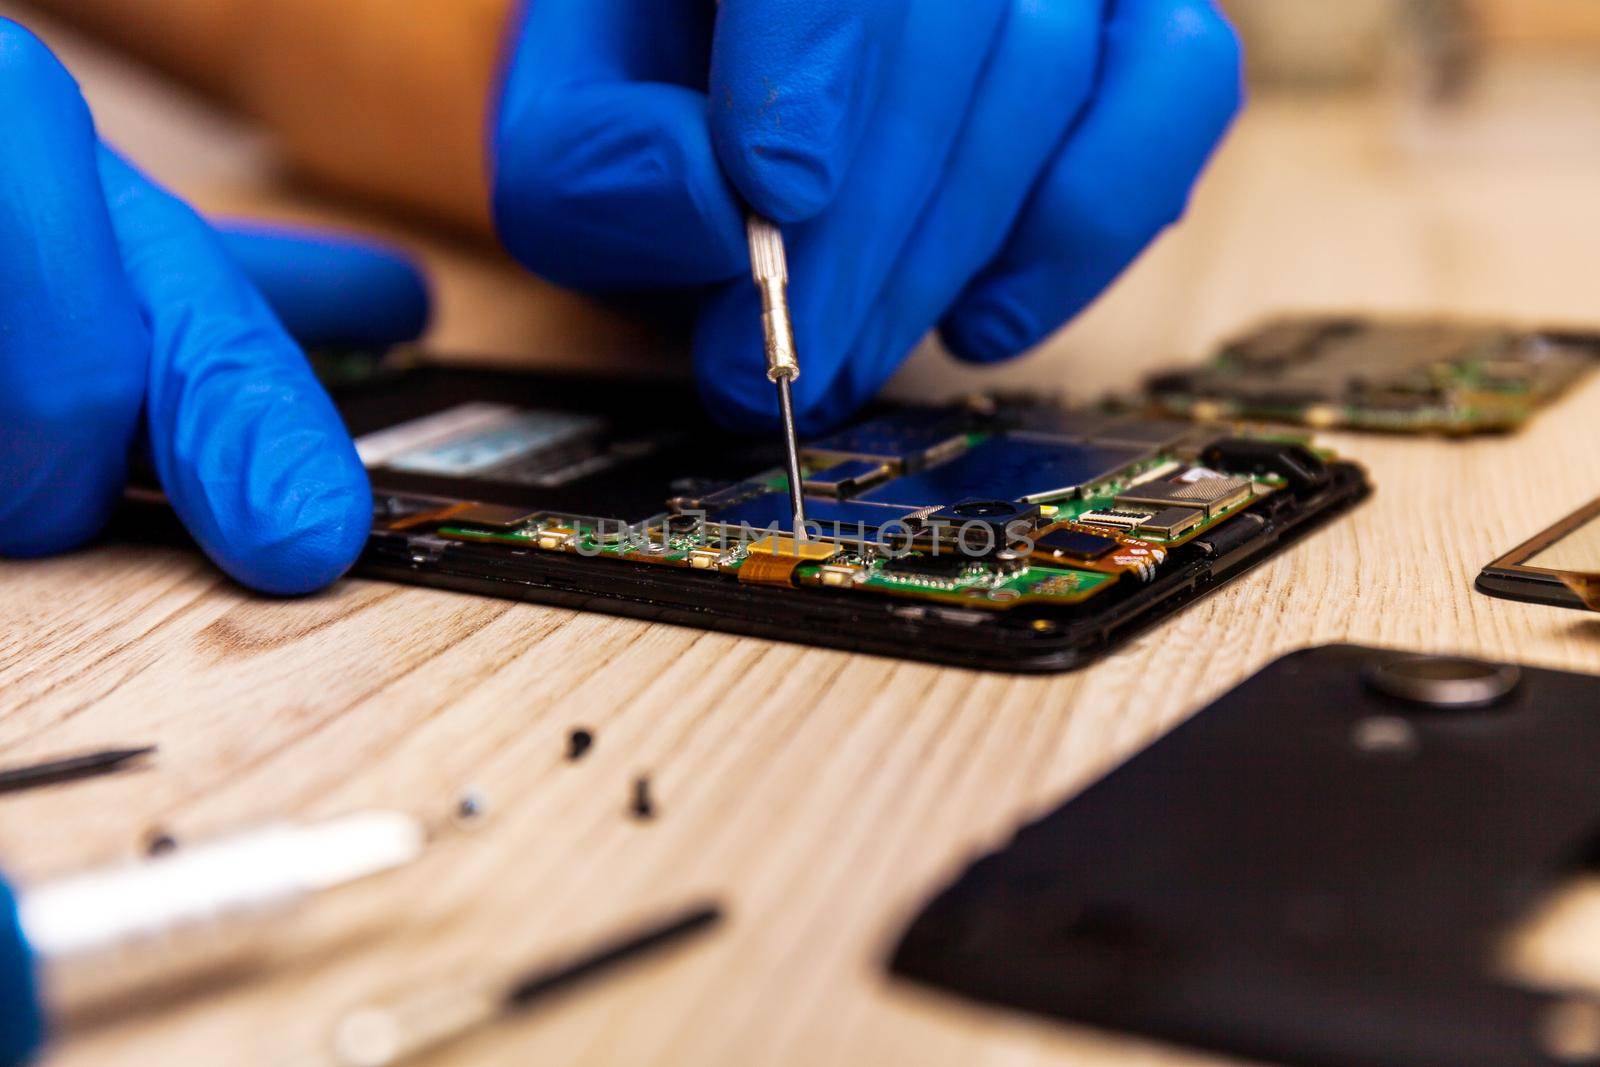 The technician repairing the smartphone's motherboard in the workshop on the table. Concept of mobile phone, electronic, upgrade and technology.